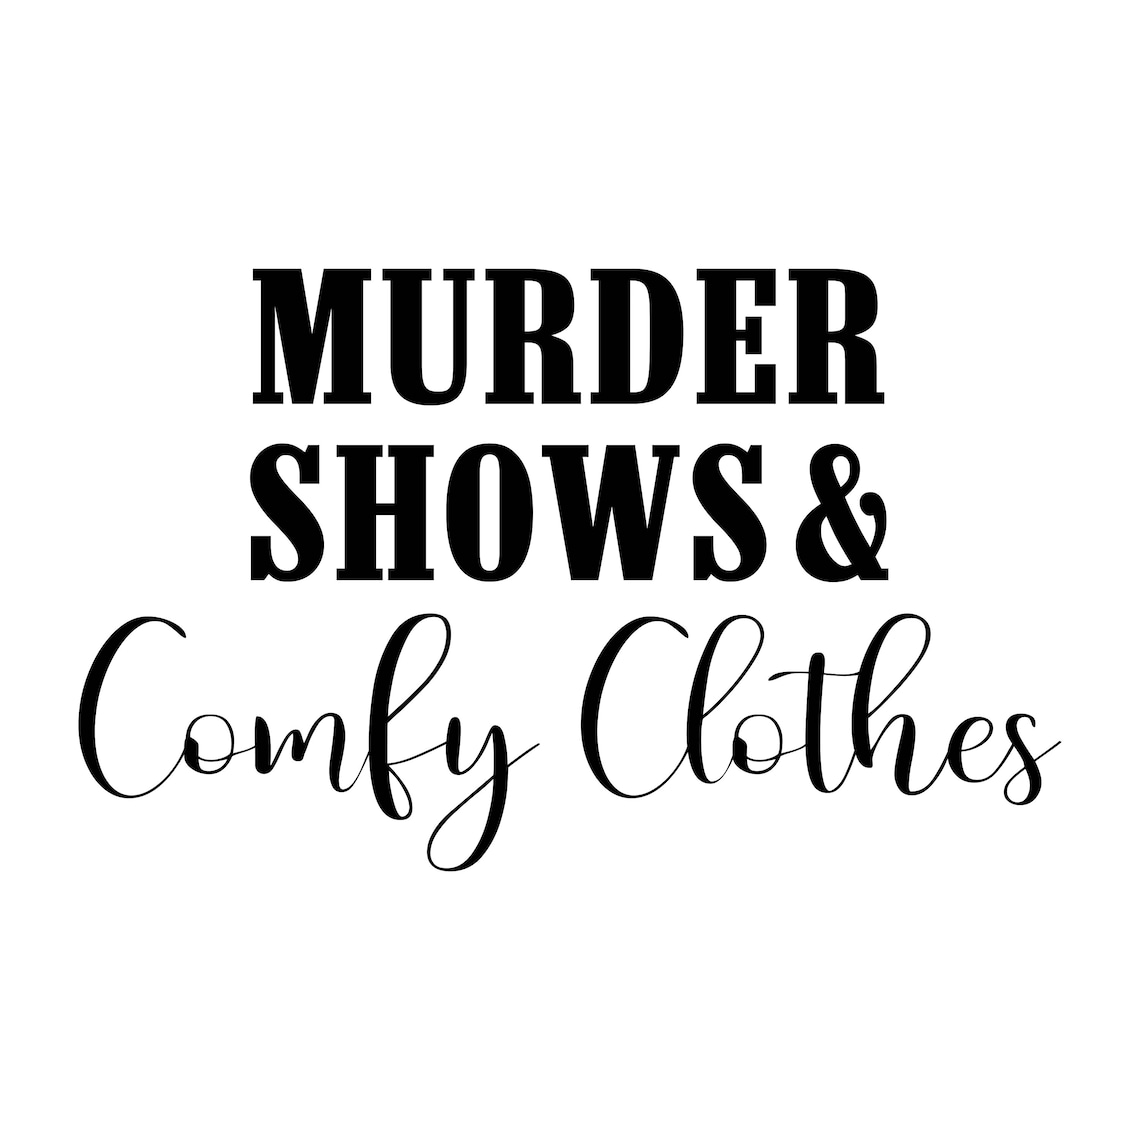 Murder Shows and Comfy Clothes Decal Files Cut Files for | Etsy